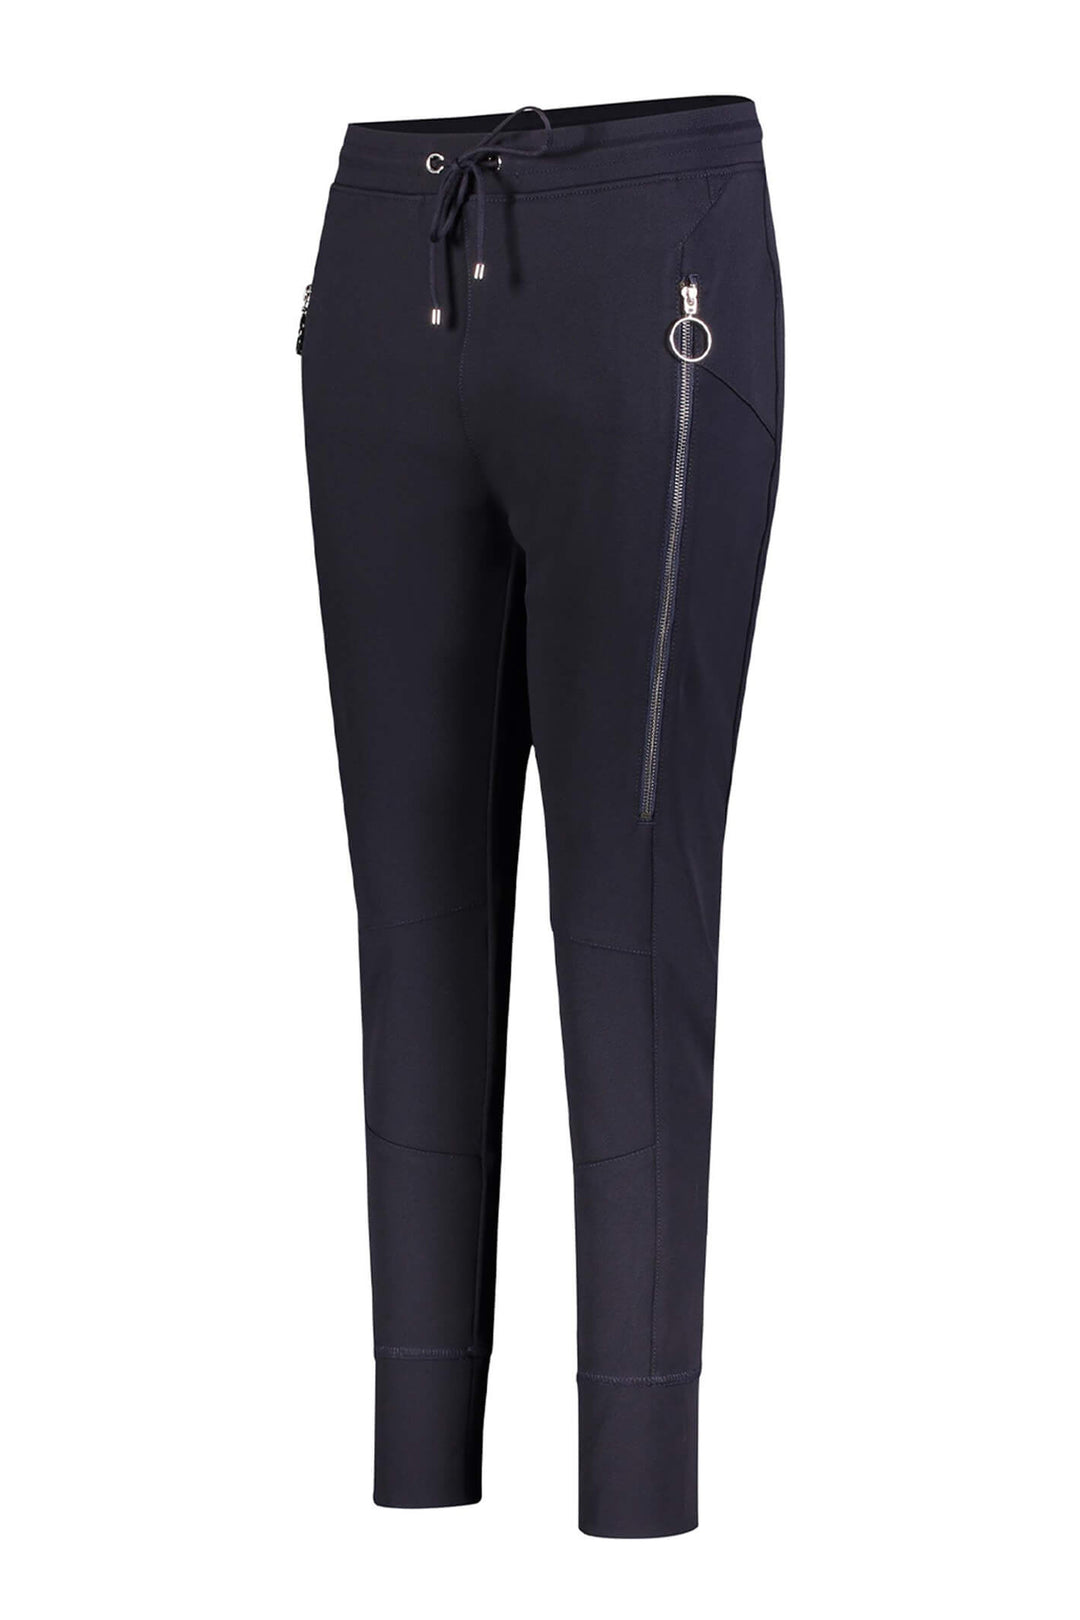 MAC Future Sporty Pull On Navy Trousers Front